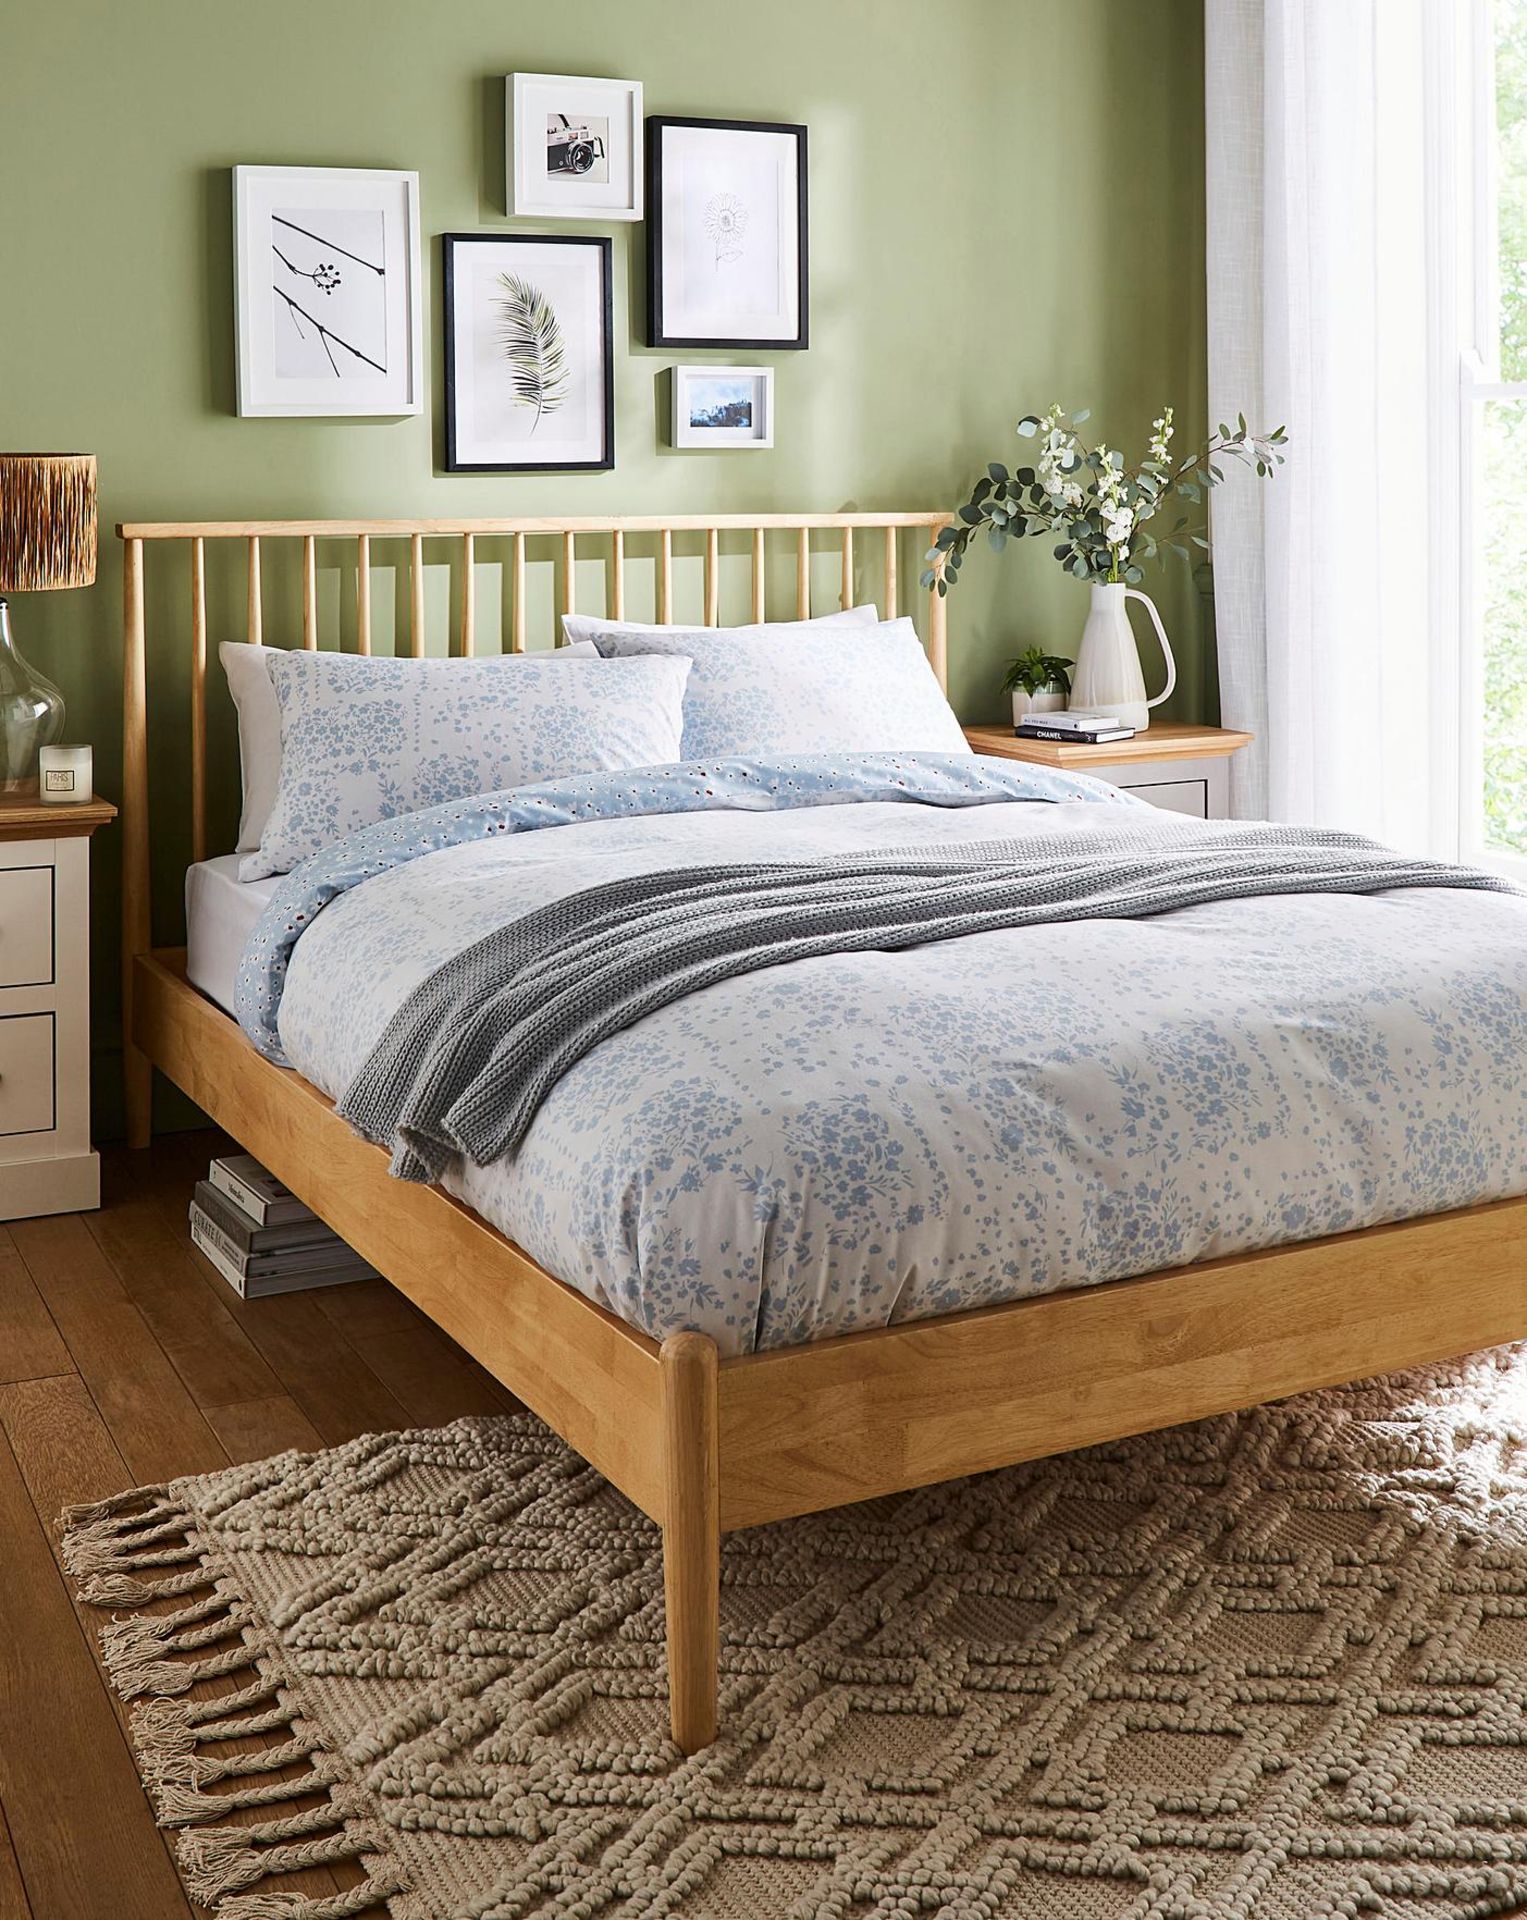 NEW & BOXED JULIPA Erika Wooden Spindle DOUBLE Bed Frame. LIGHT WOOD. RRP £699. EACH. Part of the